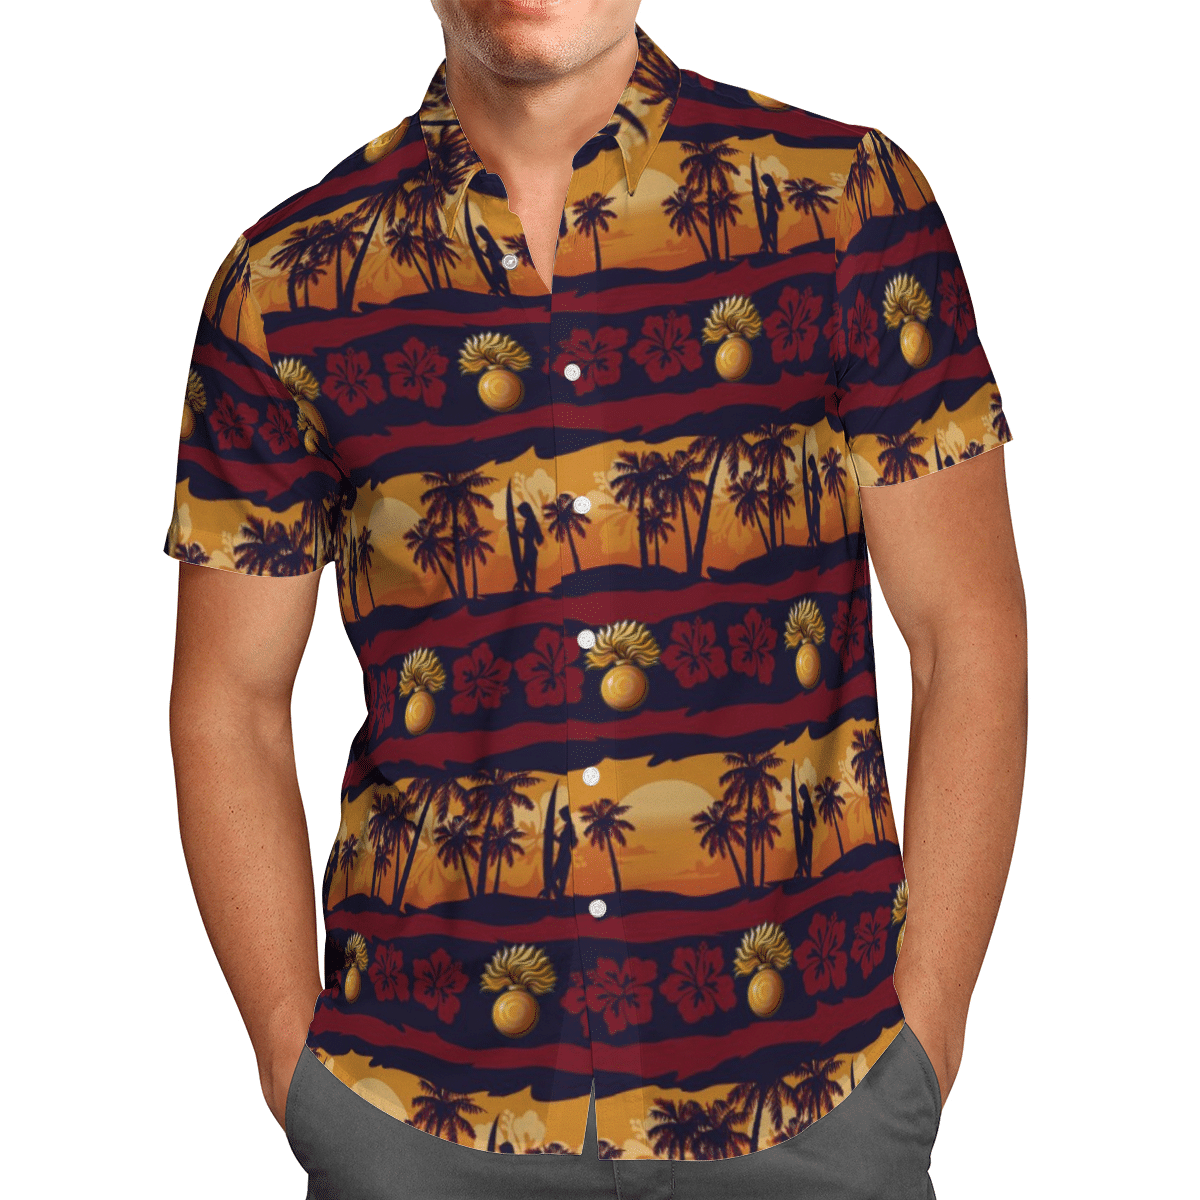 HOT British Army Grenadier Guards All Over Print Tropical Shirt1